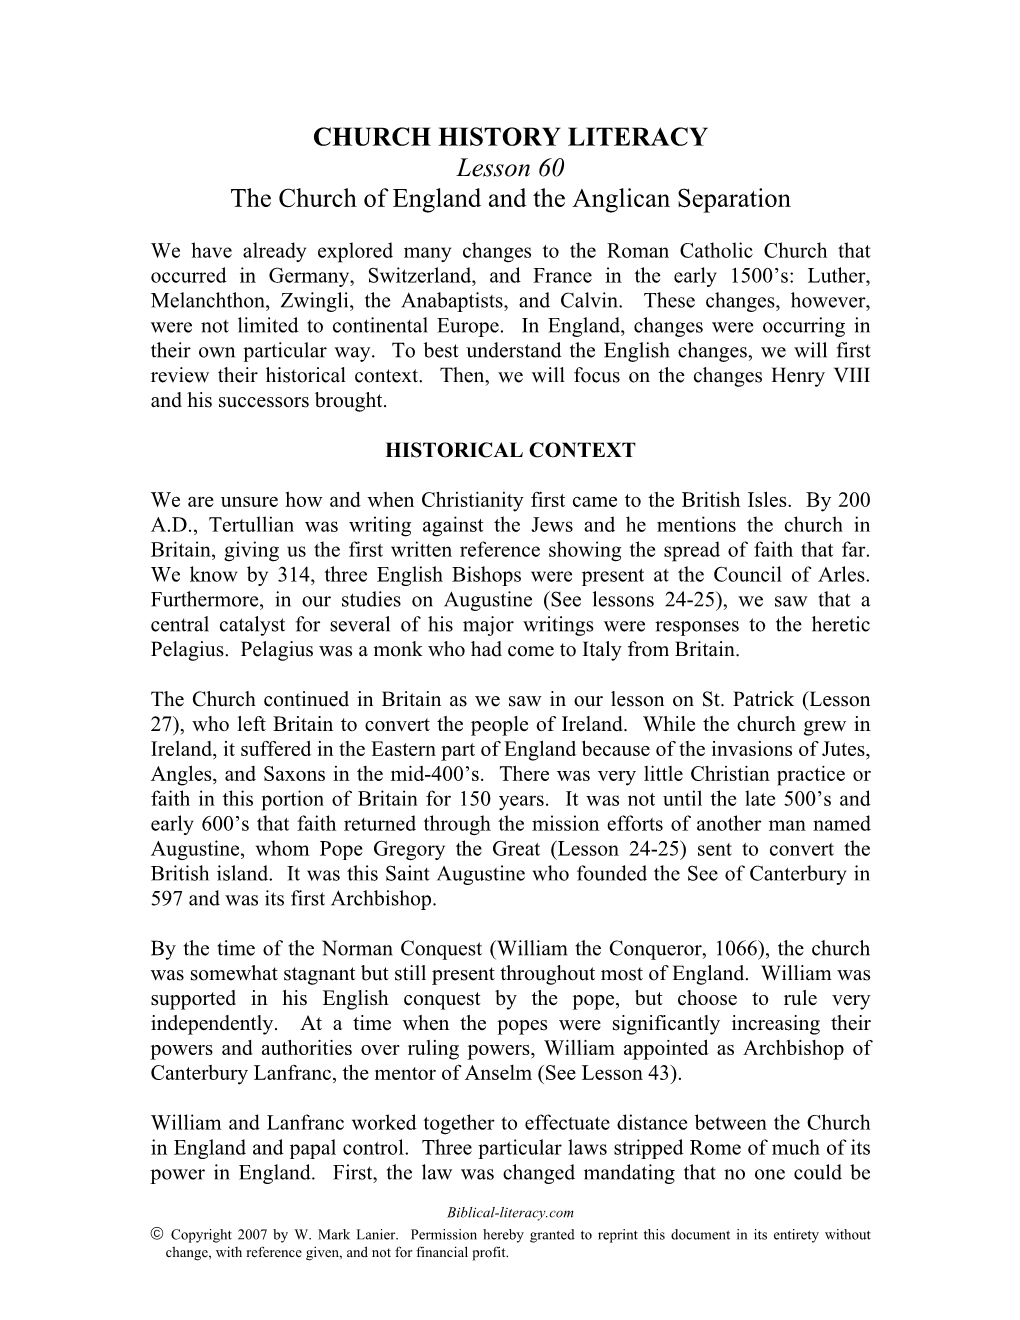 CHURCH HISTORY LITERACY Lesson 60 the Church of England and the Anglican Separation